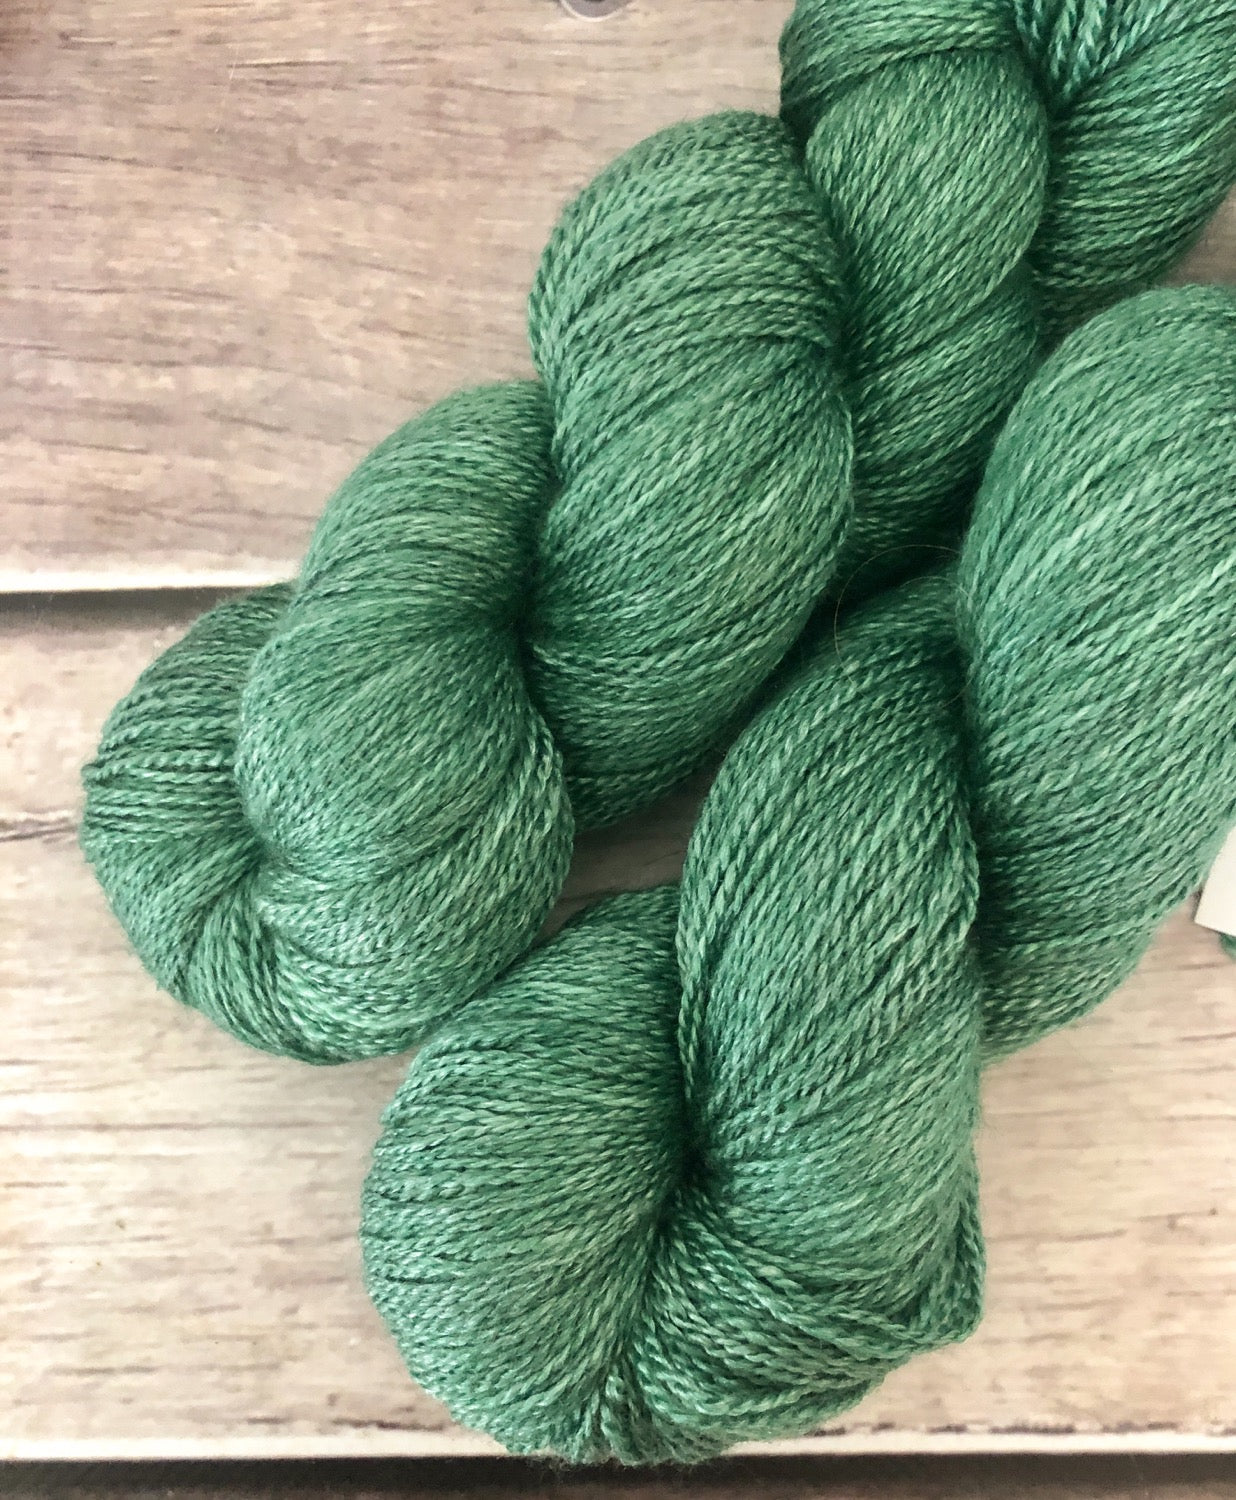 Emerald Bay - 3 ply in Mulberry silk and BFL